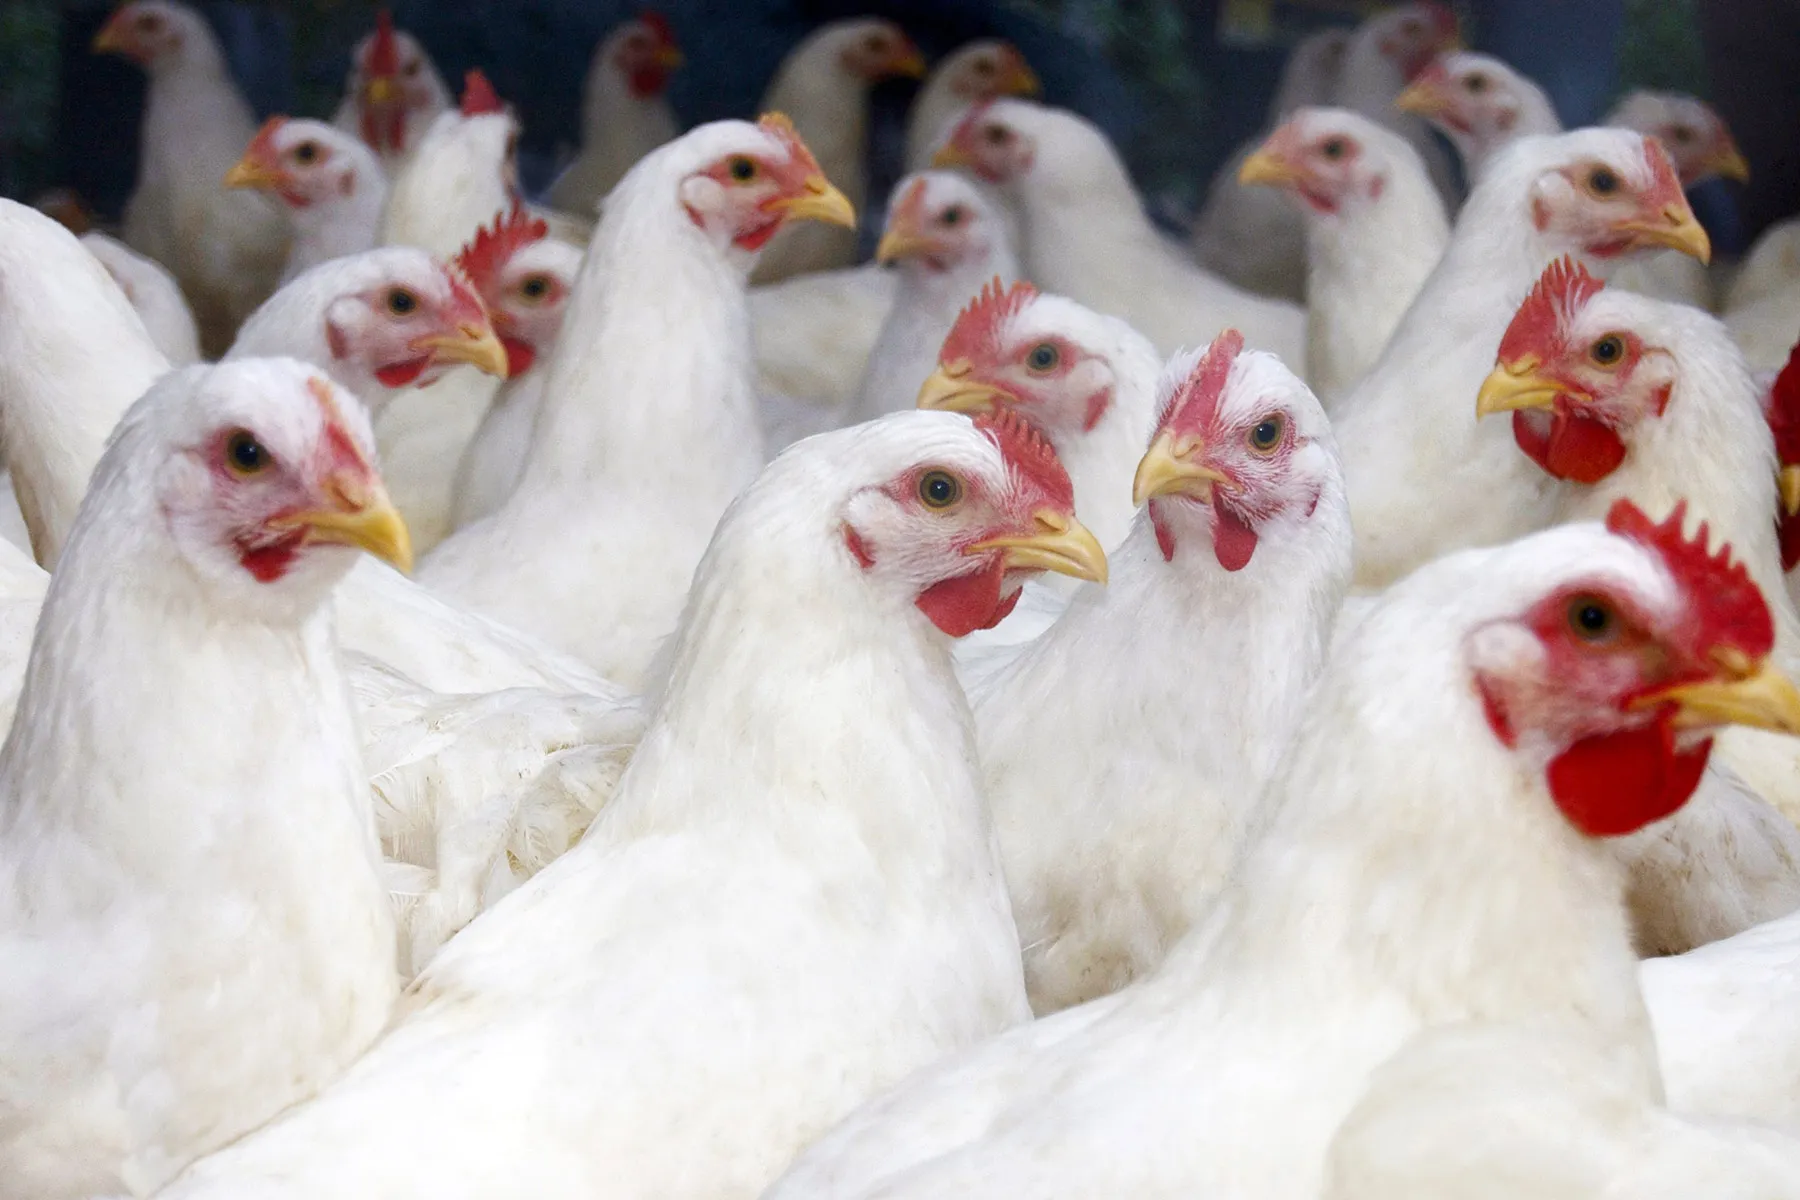 U.S. to Check Vaccine in Poultry as Fowl Flu Deaths Rise